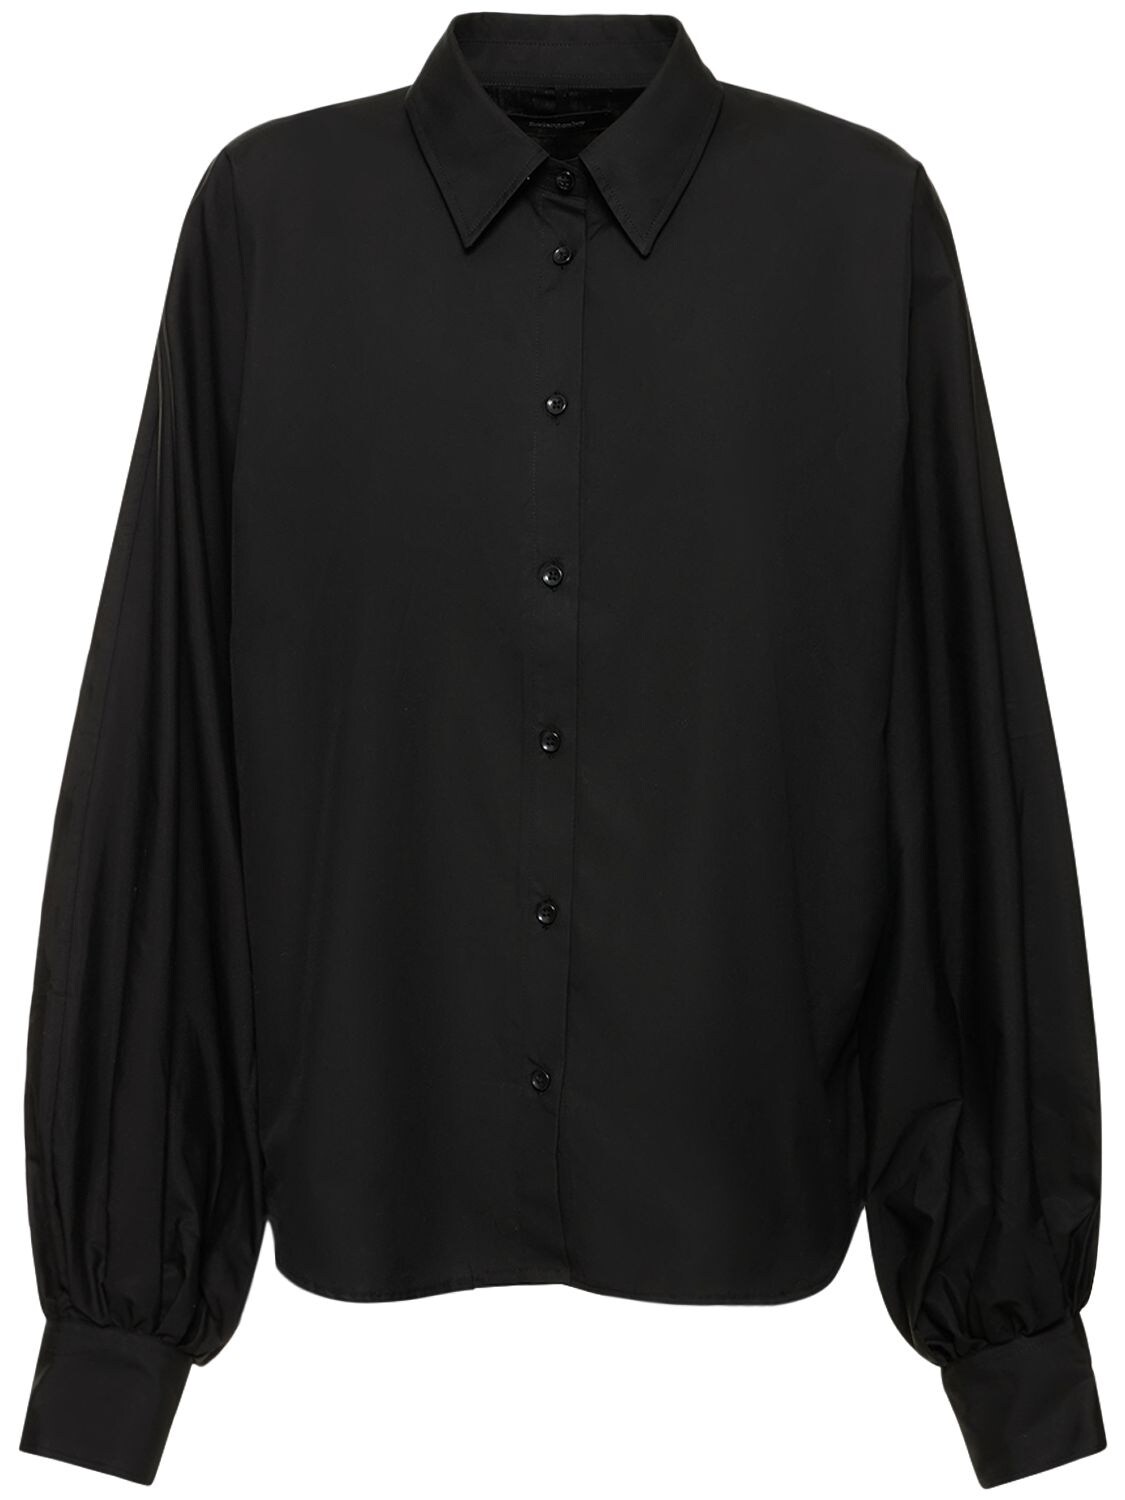 Made in Tomboy Claire Poplin Shirt with Balloon Sleeves | Smart Closet